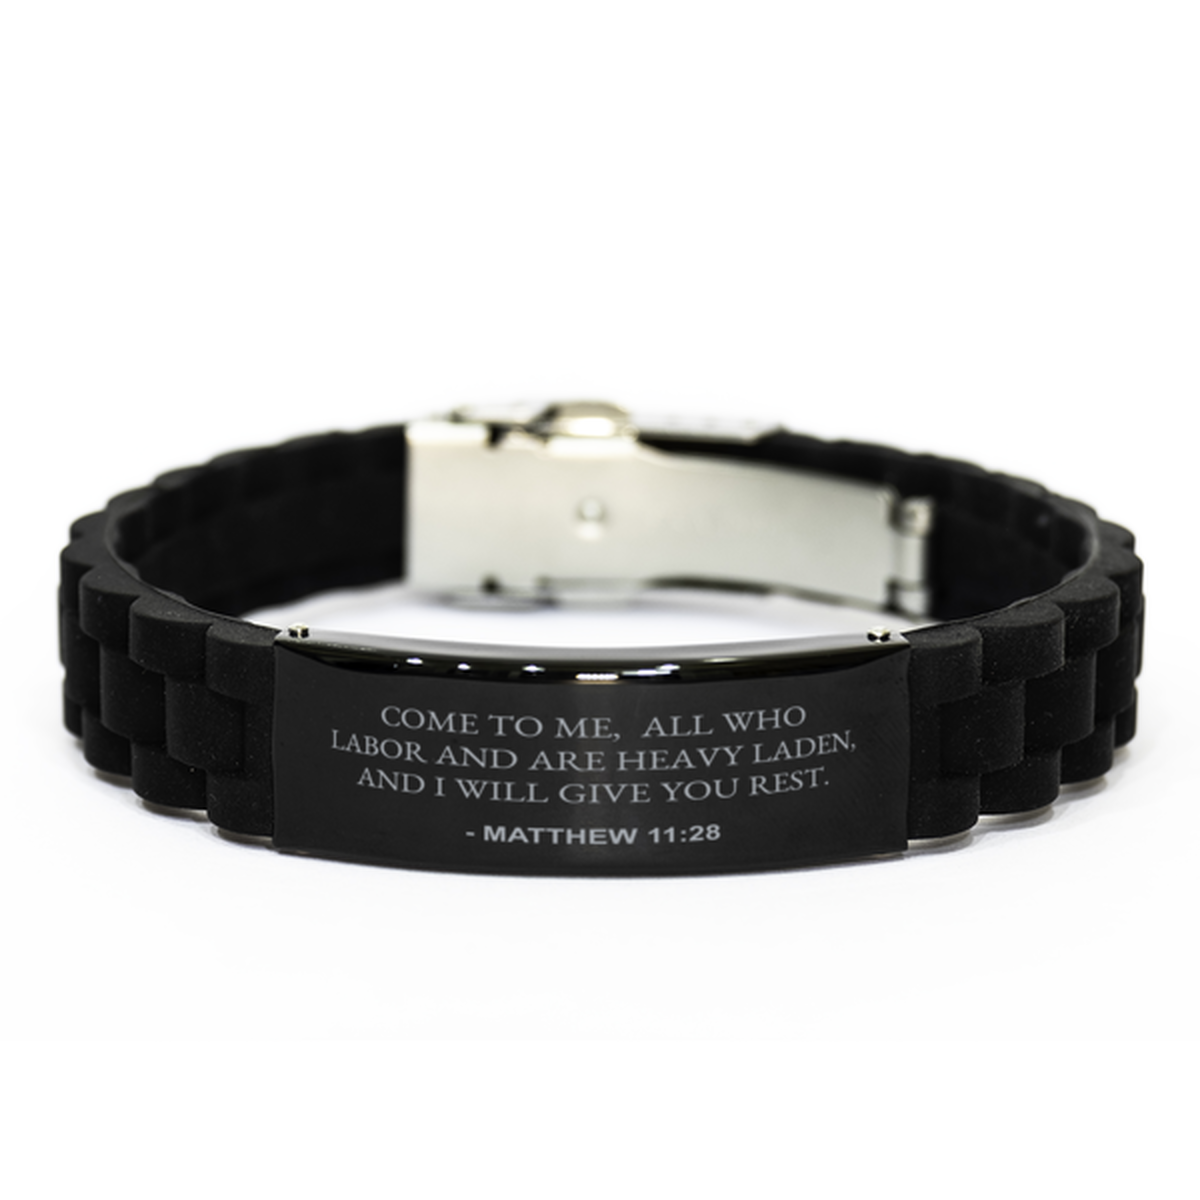 Bible Verse Black Bracelet,, Matthew 11:28 Come To Me, All Who Labor And Are Heavy Laden,, Inspirational Christian Gifts For Men Women